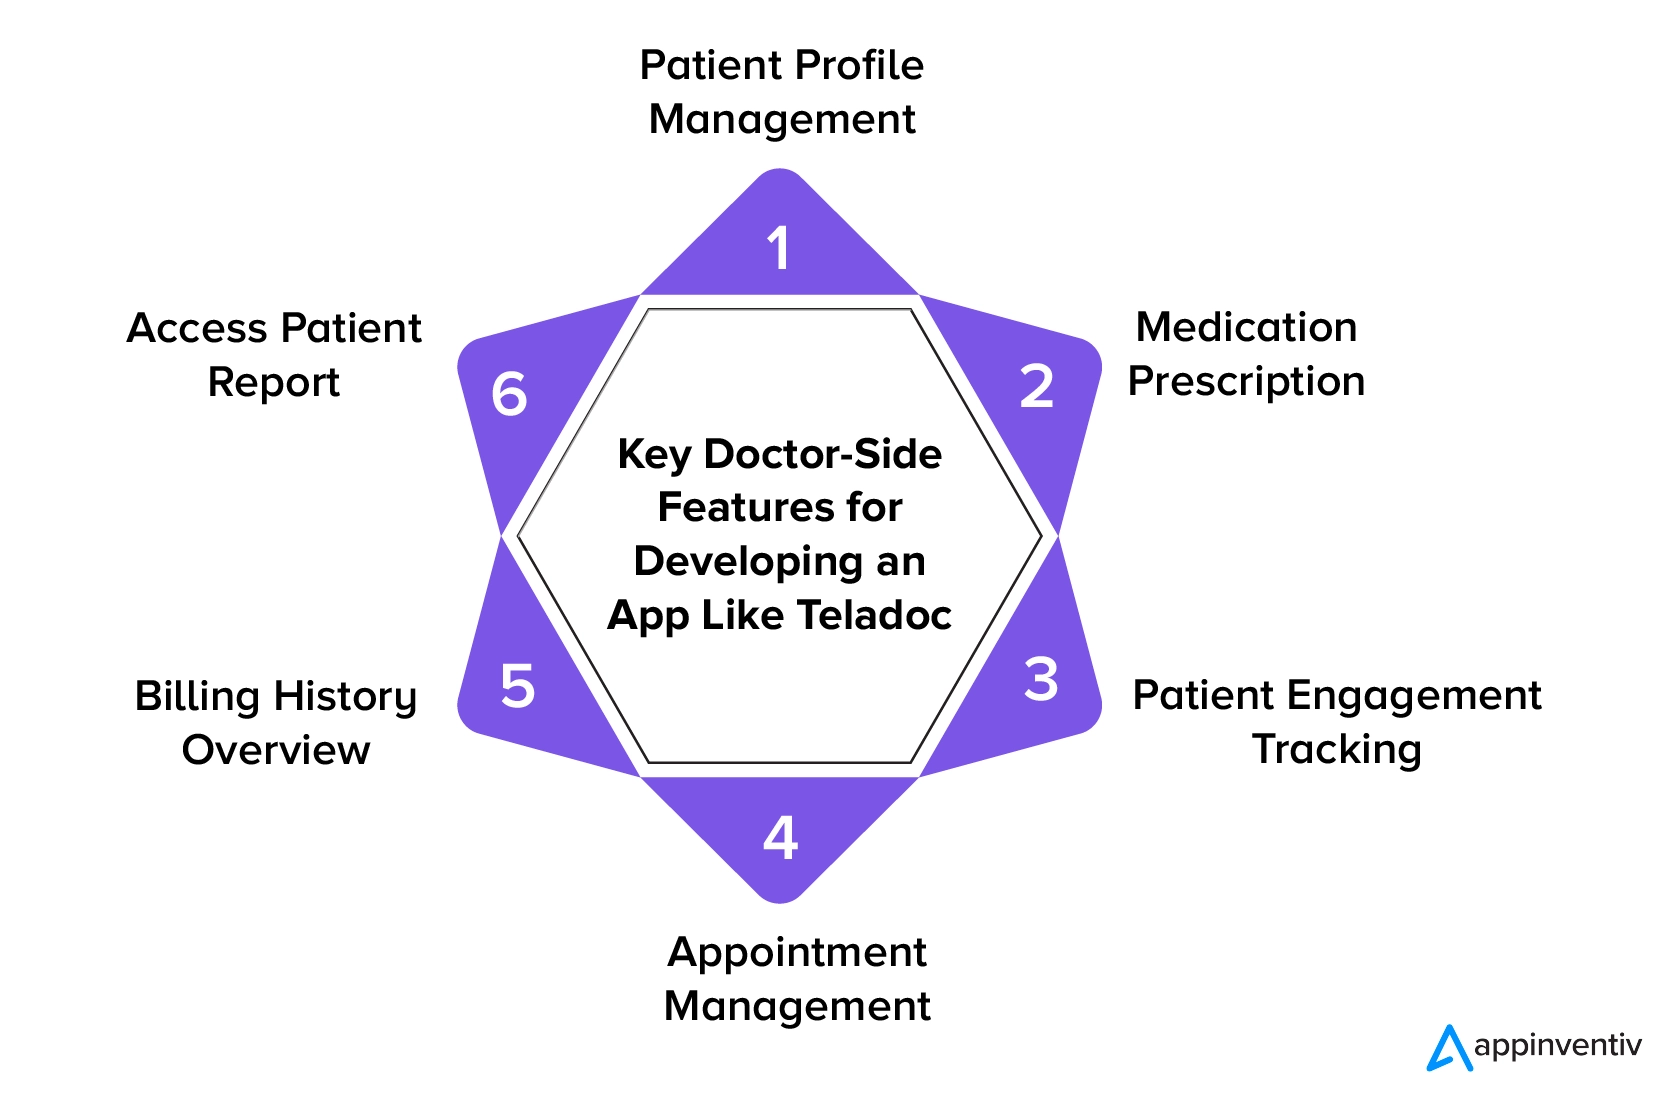 Key Doctor-Side Features for Developing an App Like Teladoc